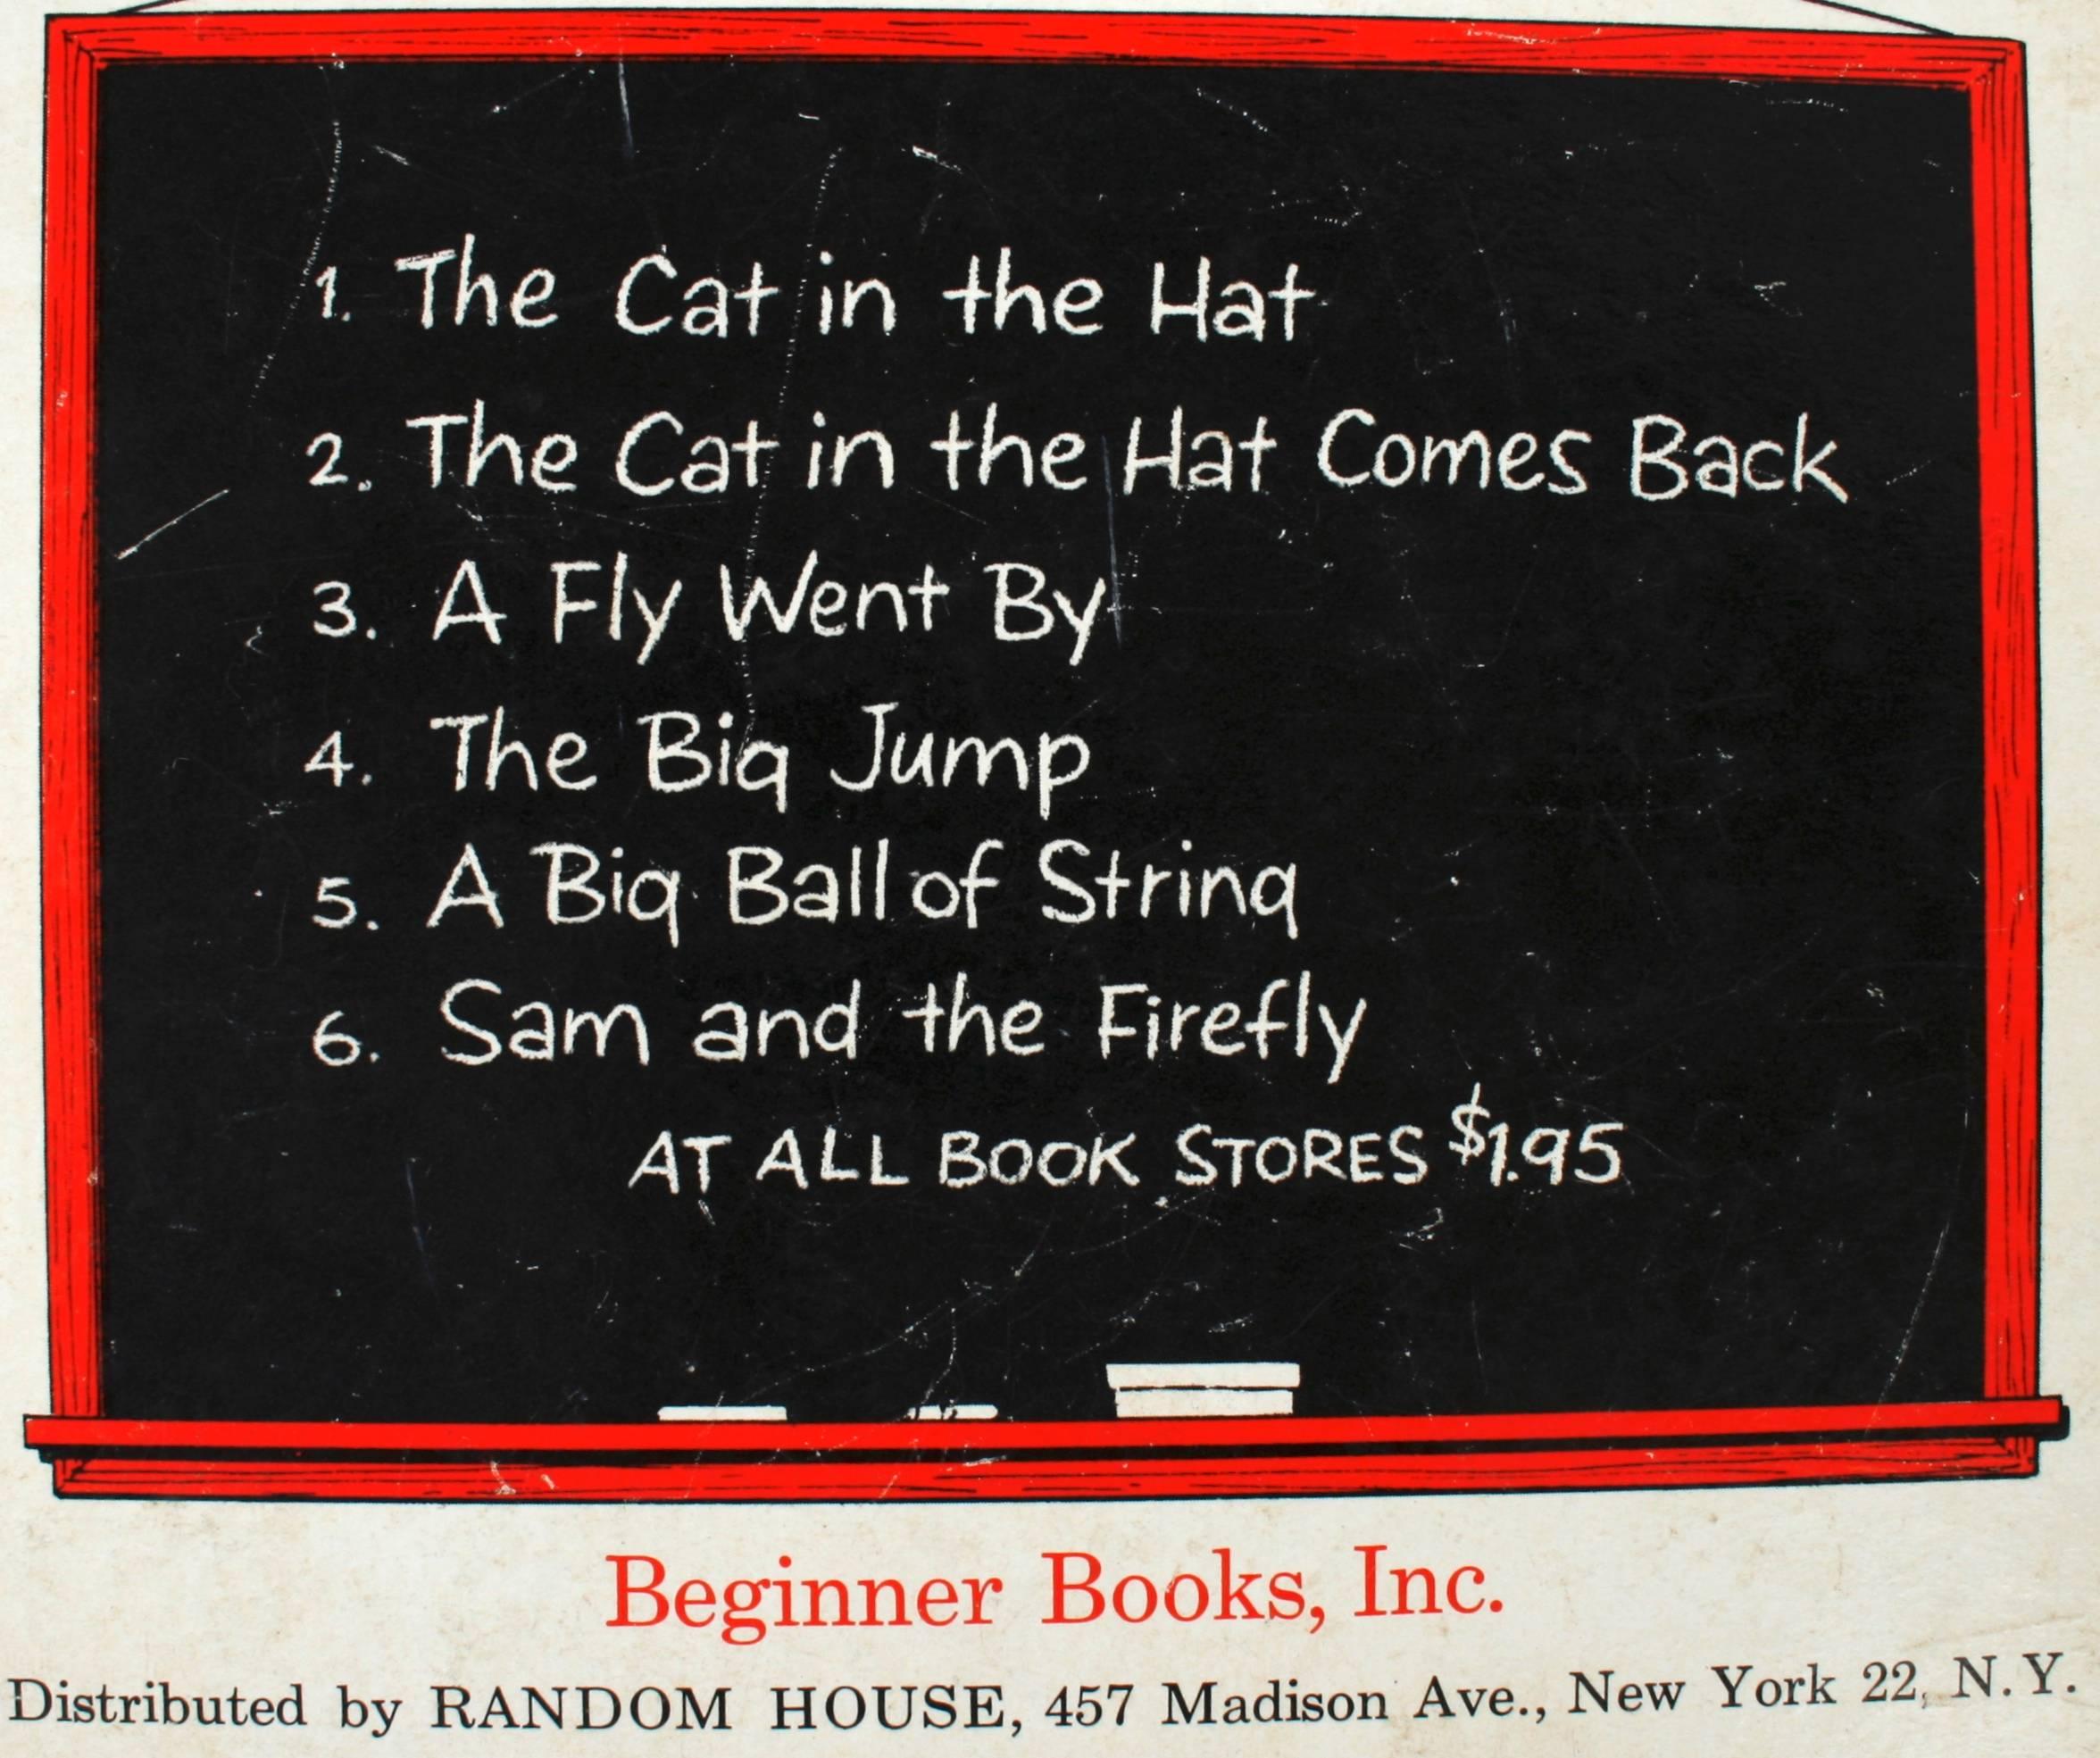 Paper The Cat in the Hat Comes Back, First Edition by Dr. Seuss